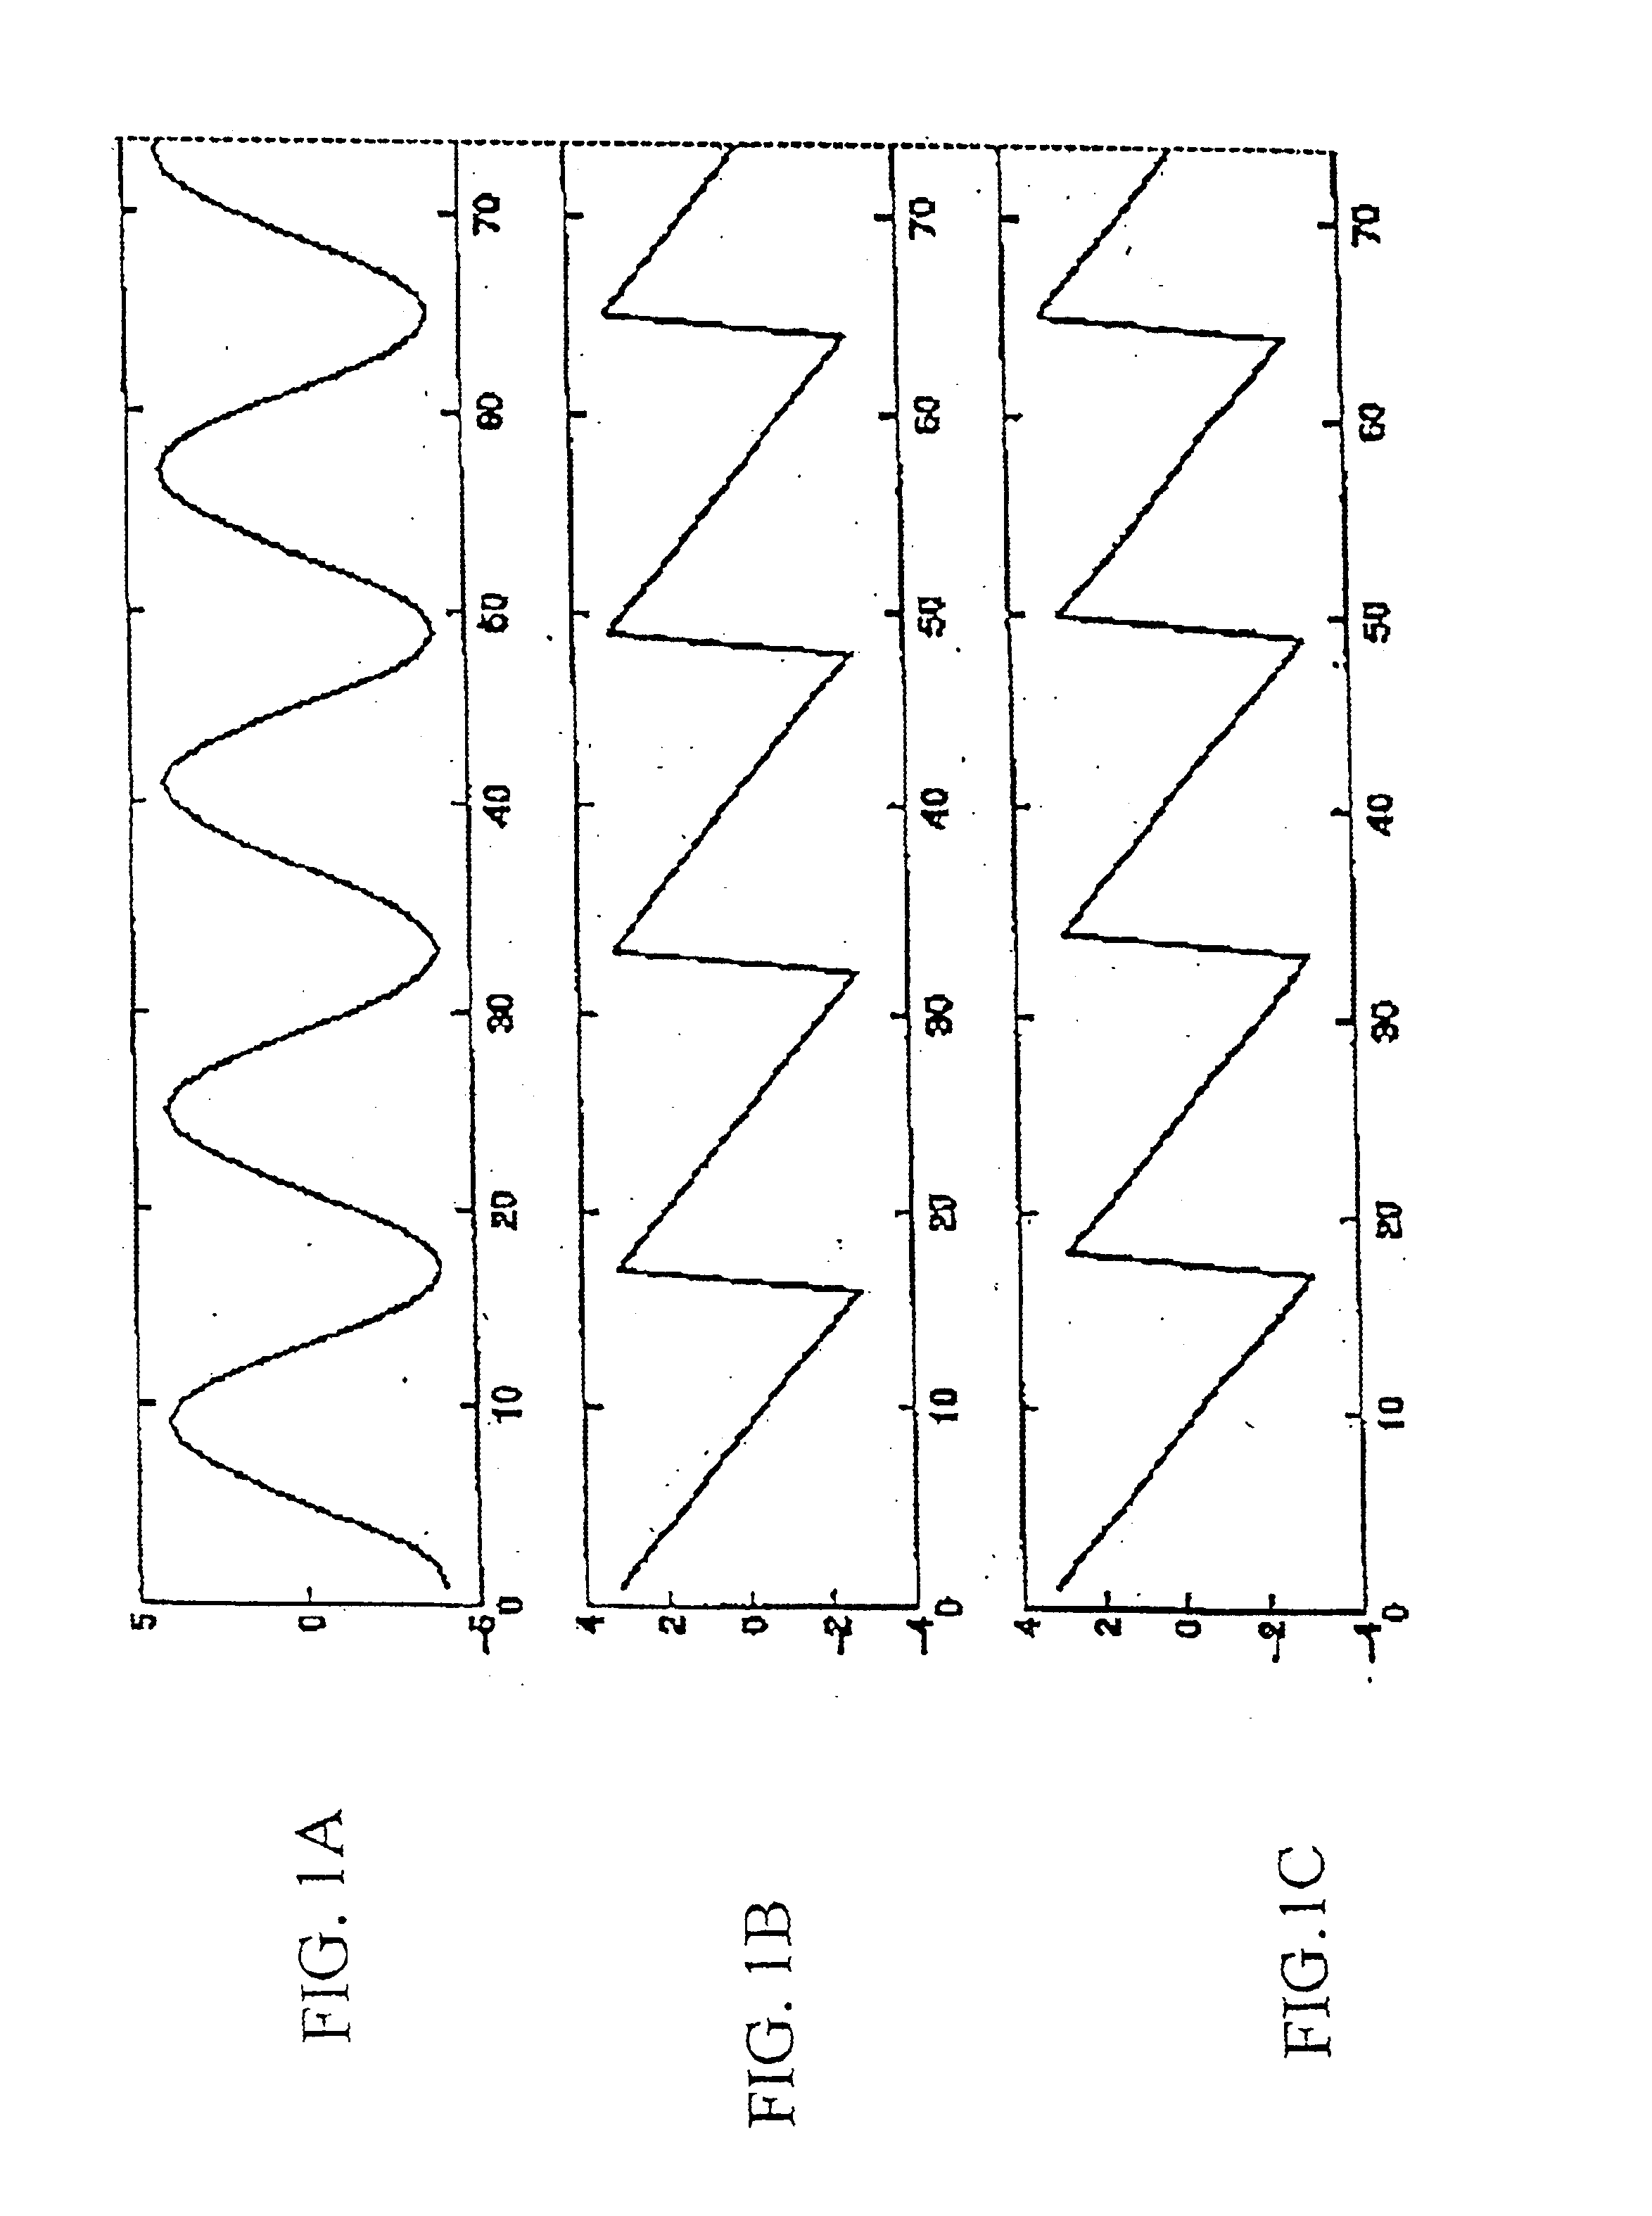 Seismic data processing method to enhance fault and channel display